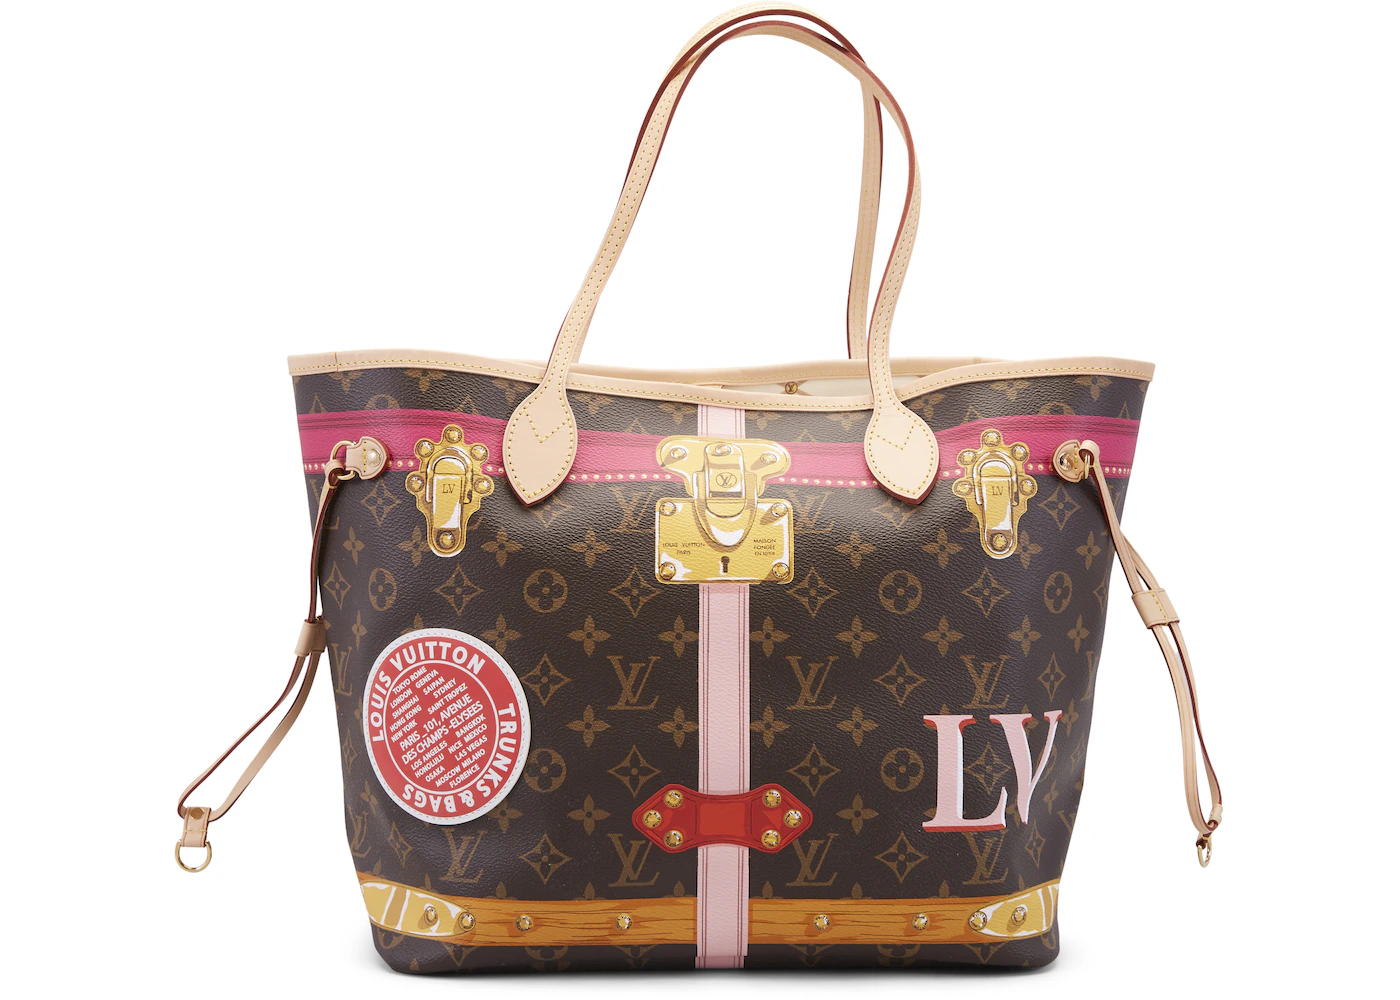 pink lined louis vuitton